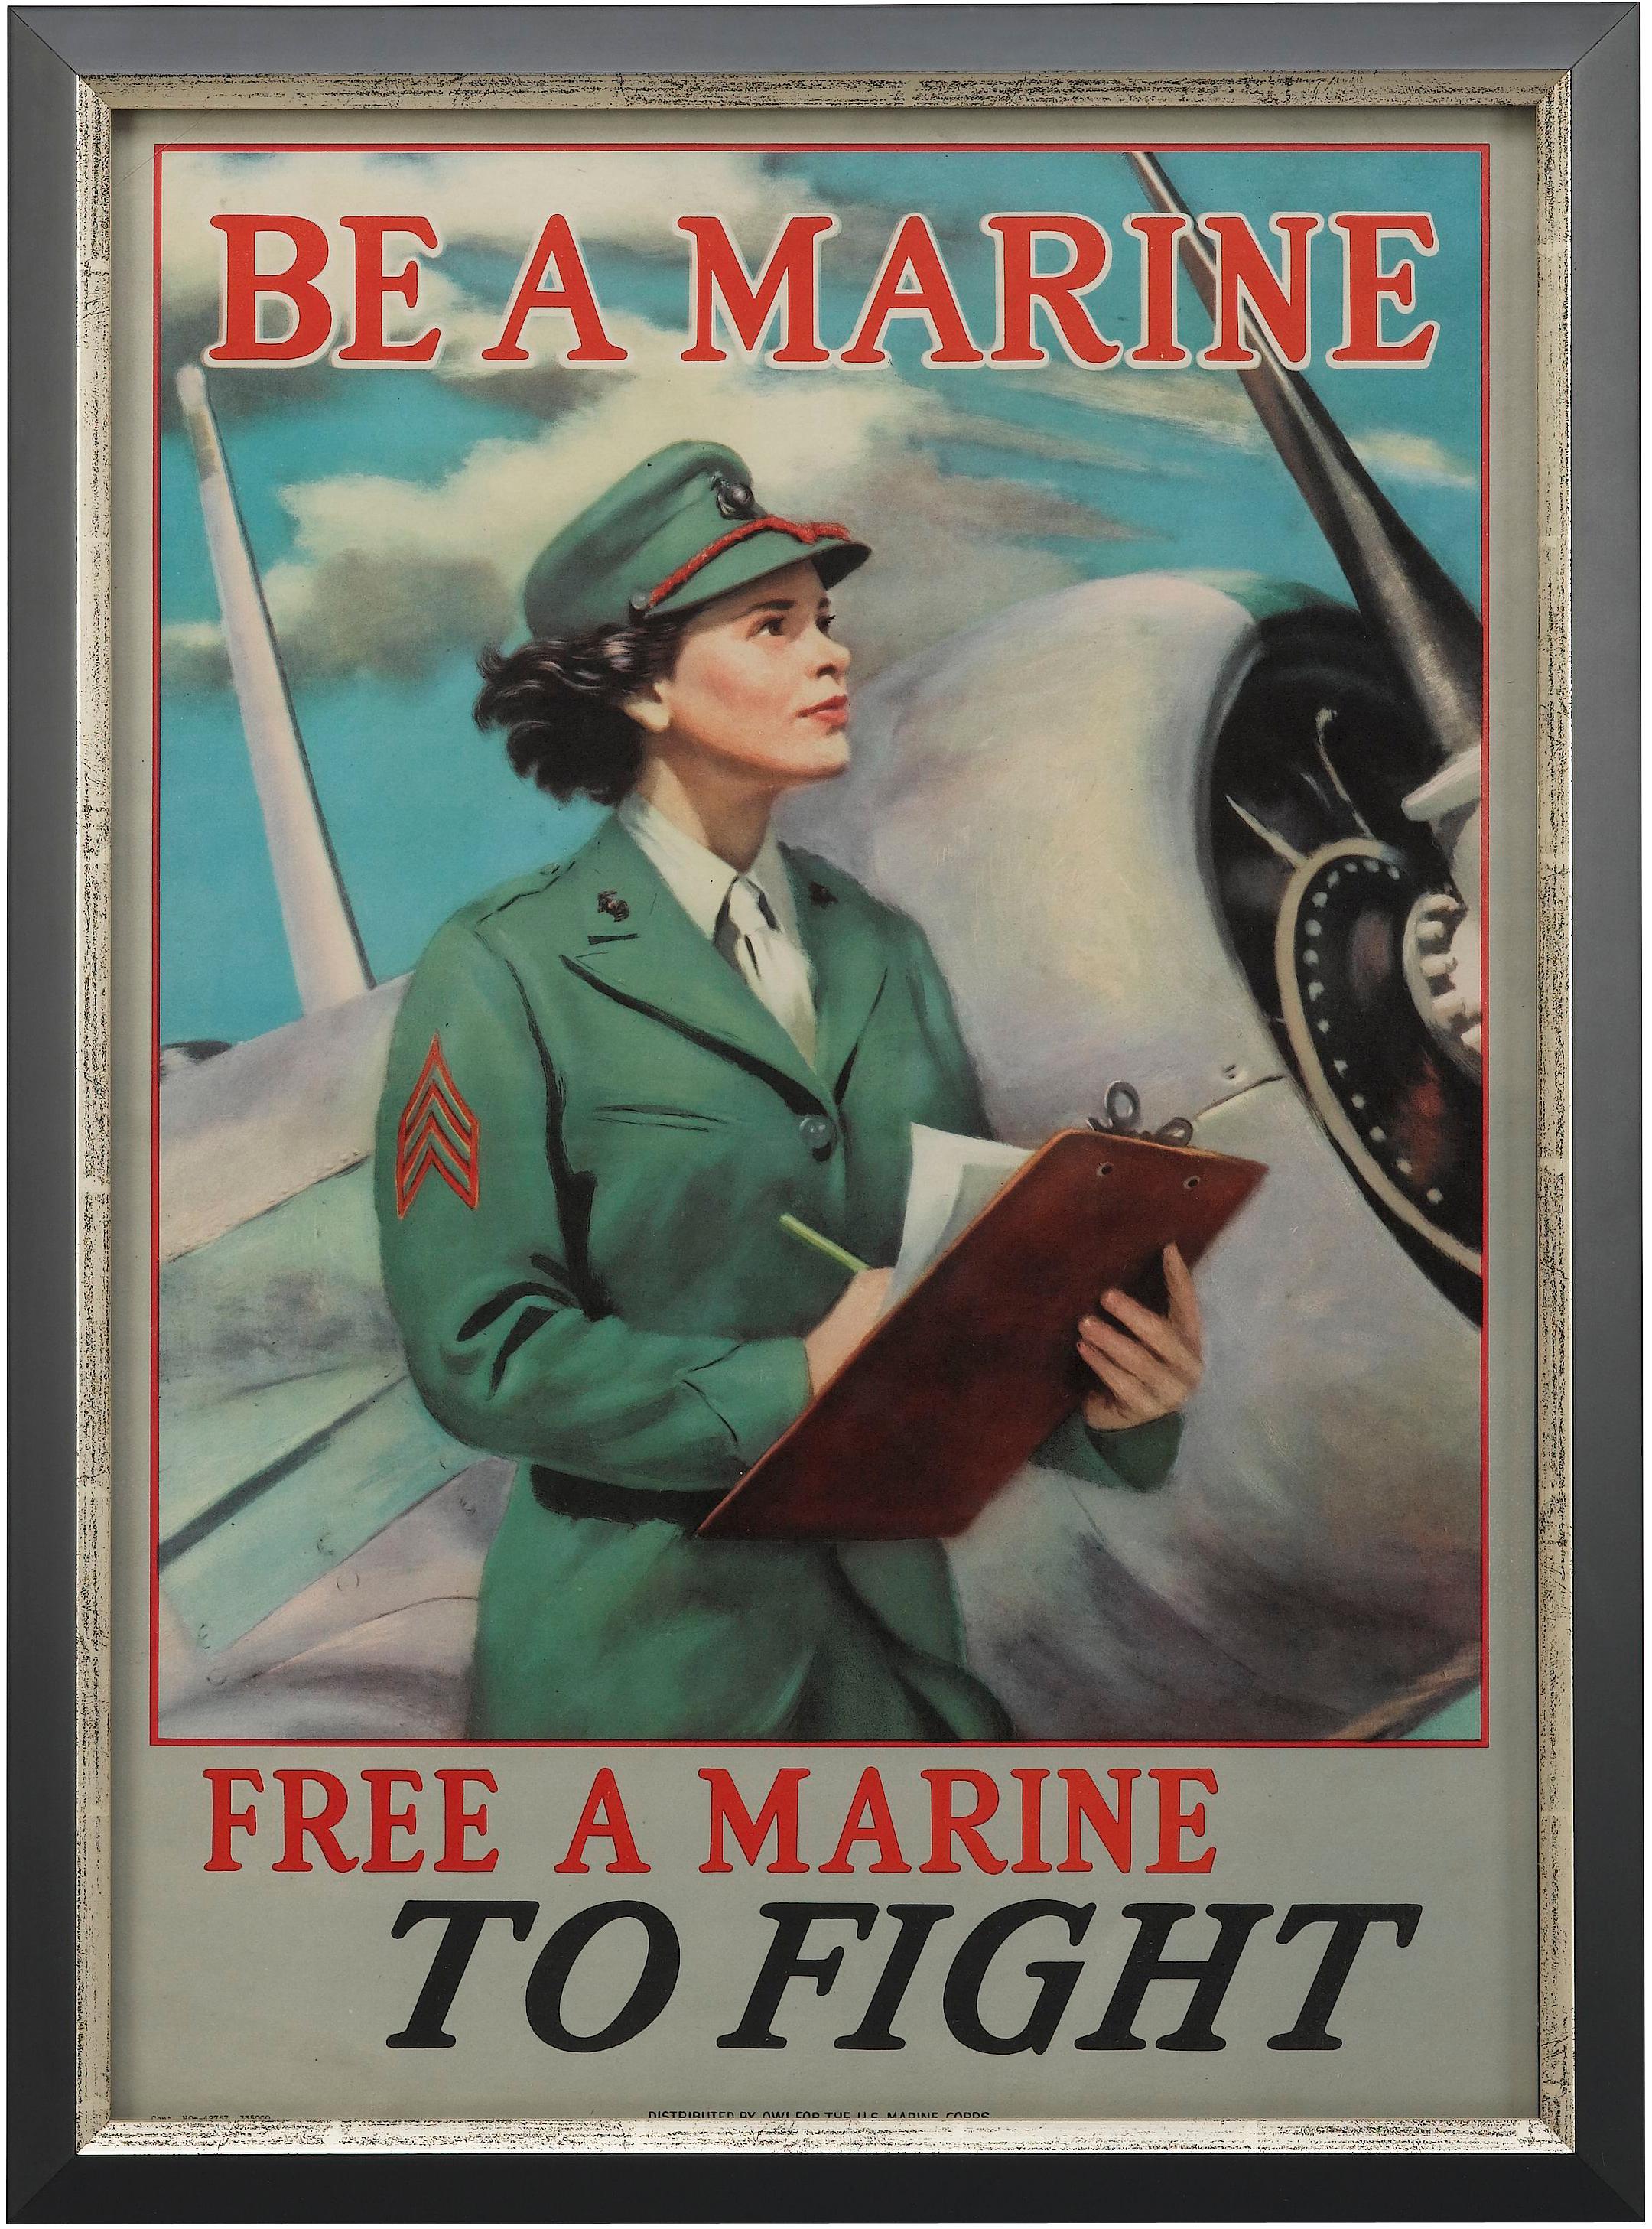 This vintage recruitment poster was issued shortly after the United States entered WWII and urges women to join the United States Marine Corps. The poster is printed with the recruitment slogan “Be A Marine, Free A Marine To Fight”and depicts a